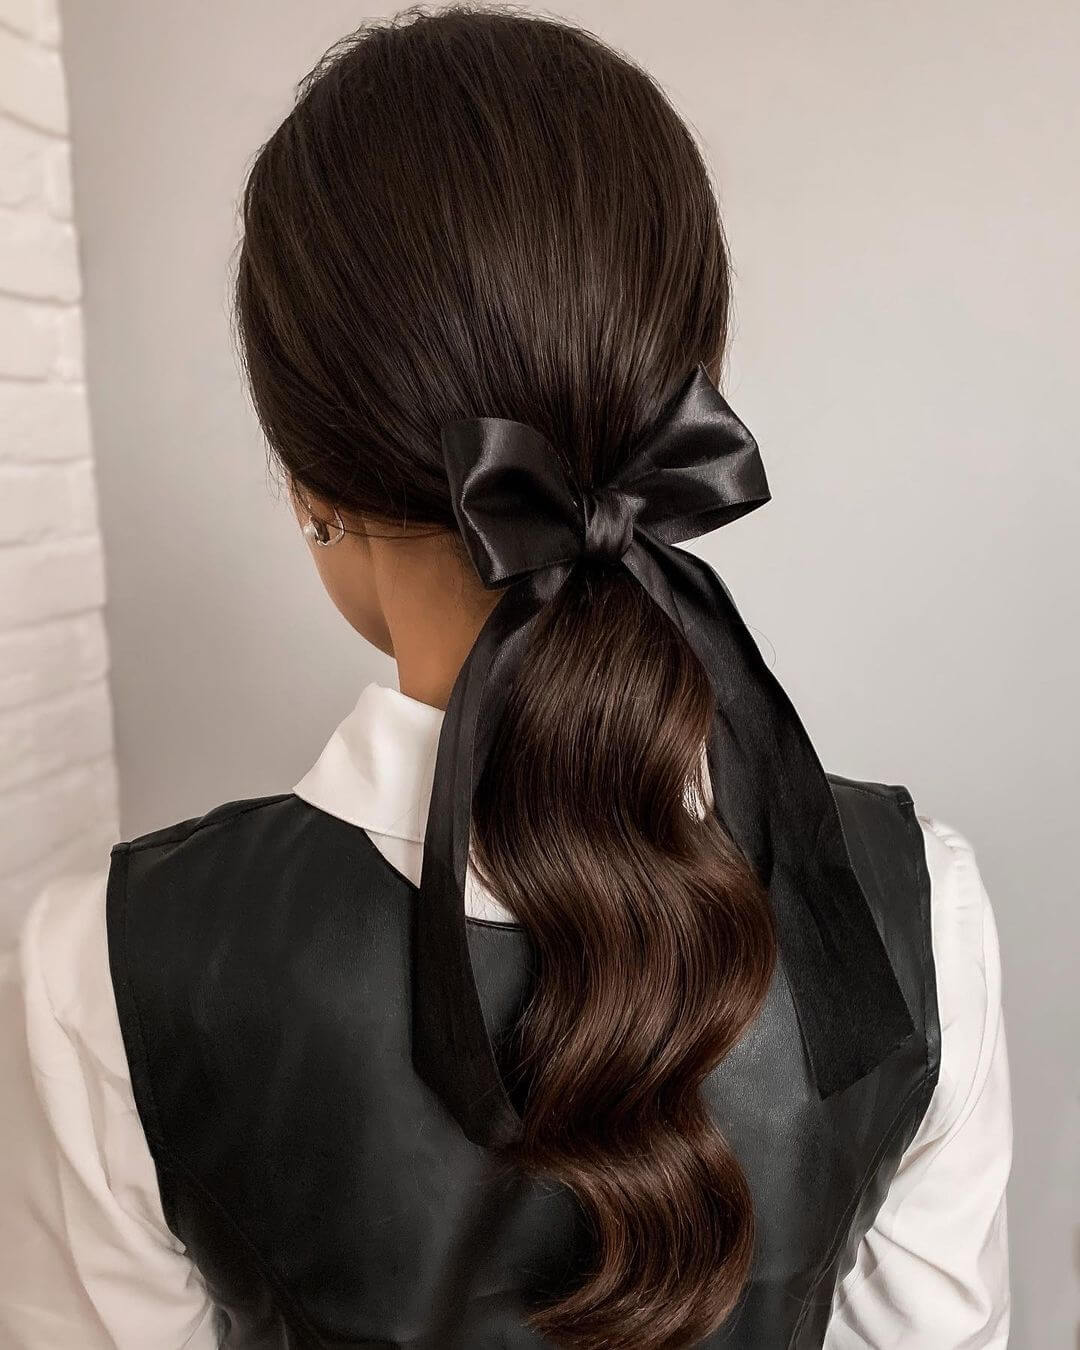 Office Hairstyle For Woman with Long Hair - K4 Fashion